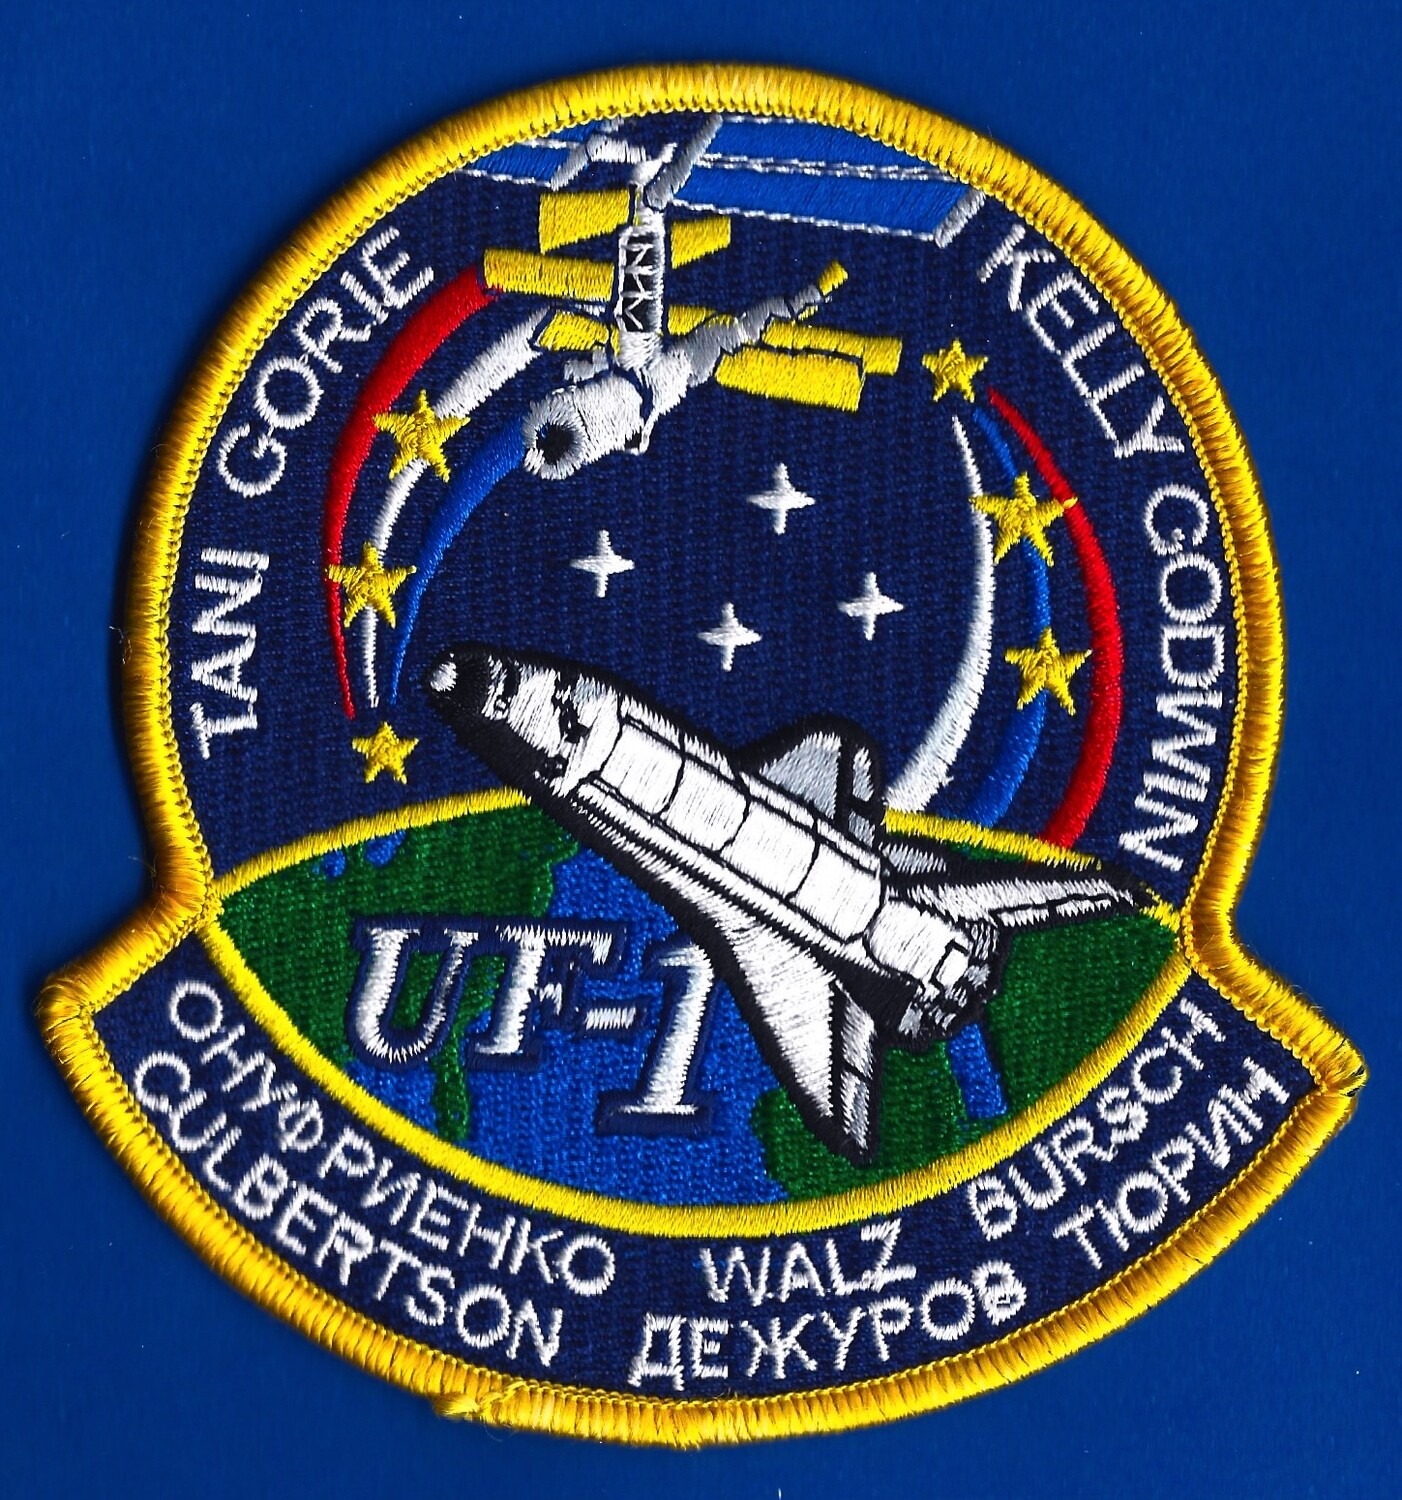 STS-108 Space patch